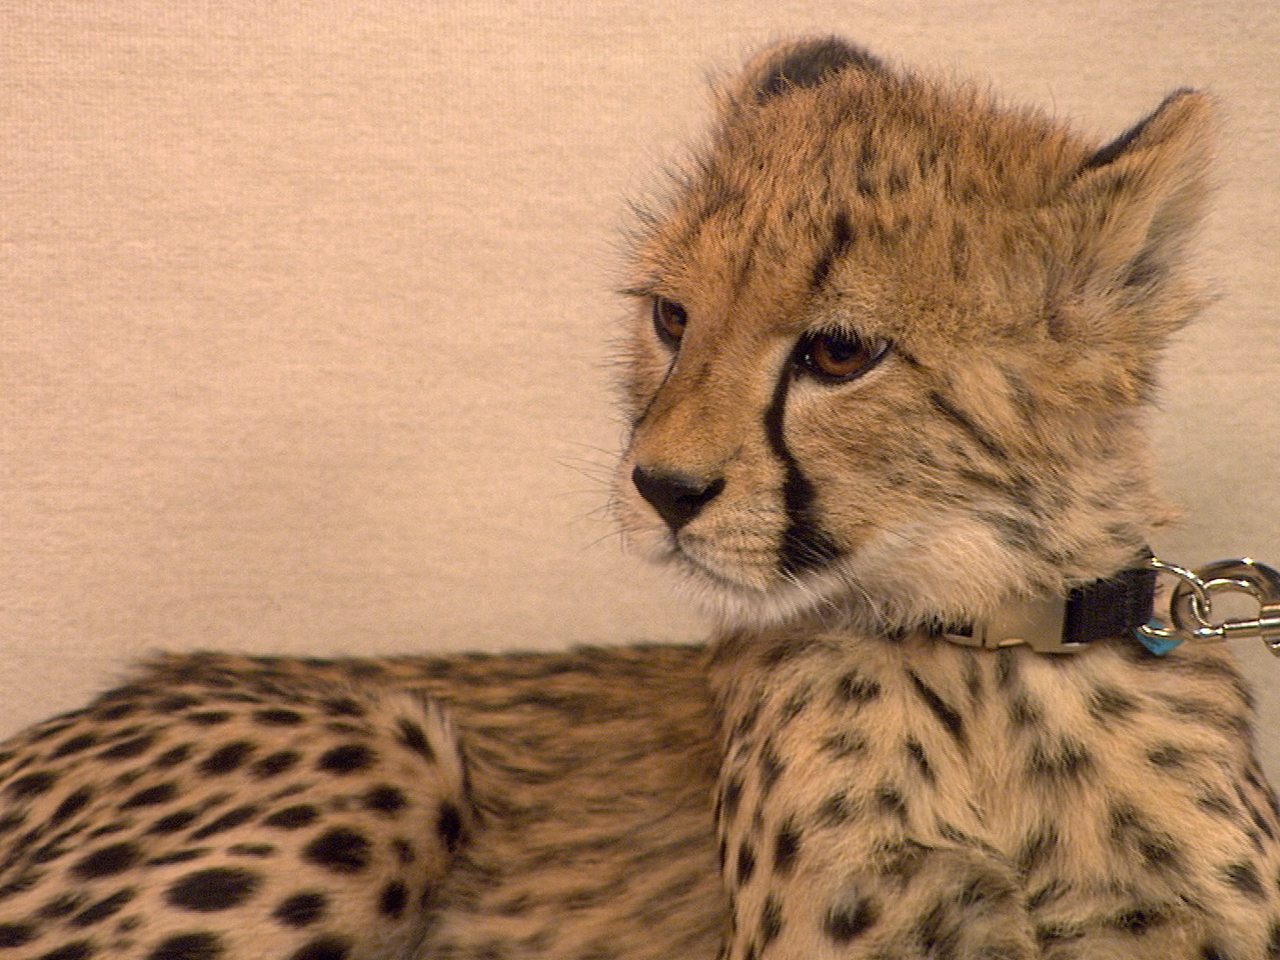 World's fastest runner: The cheetah in slow motion